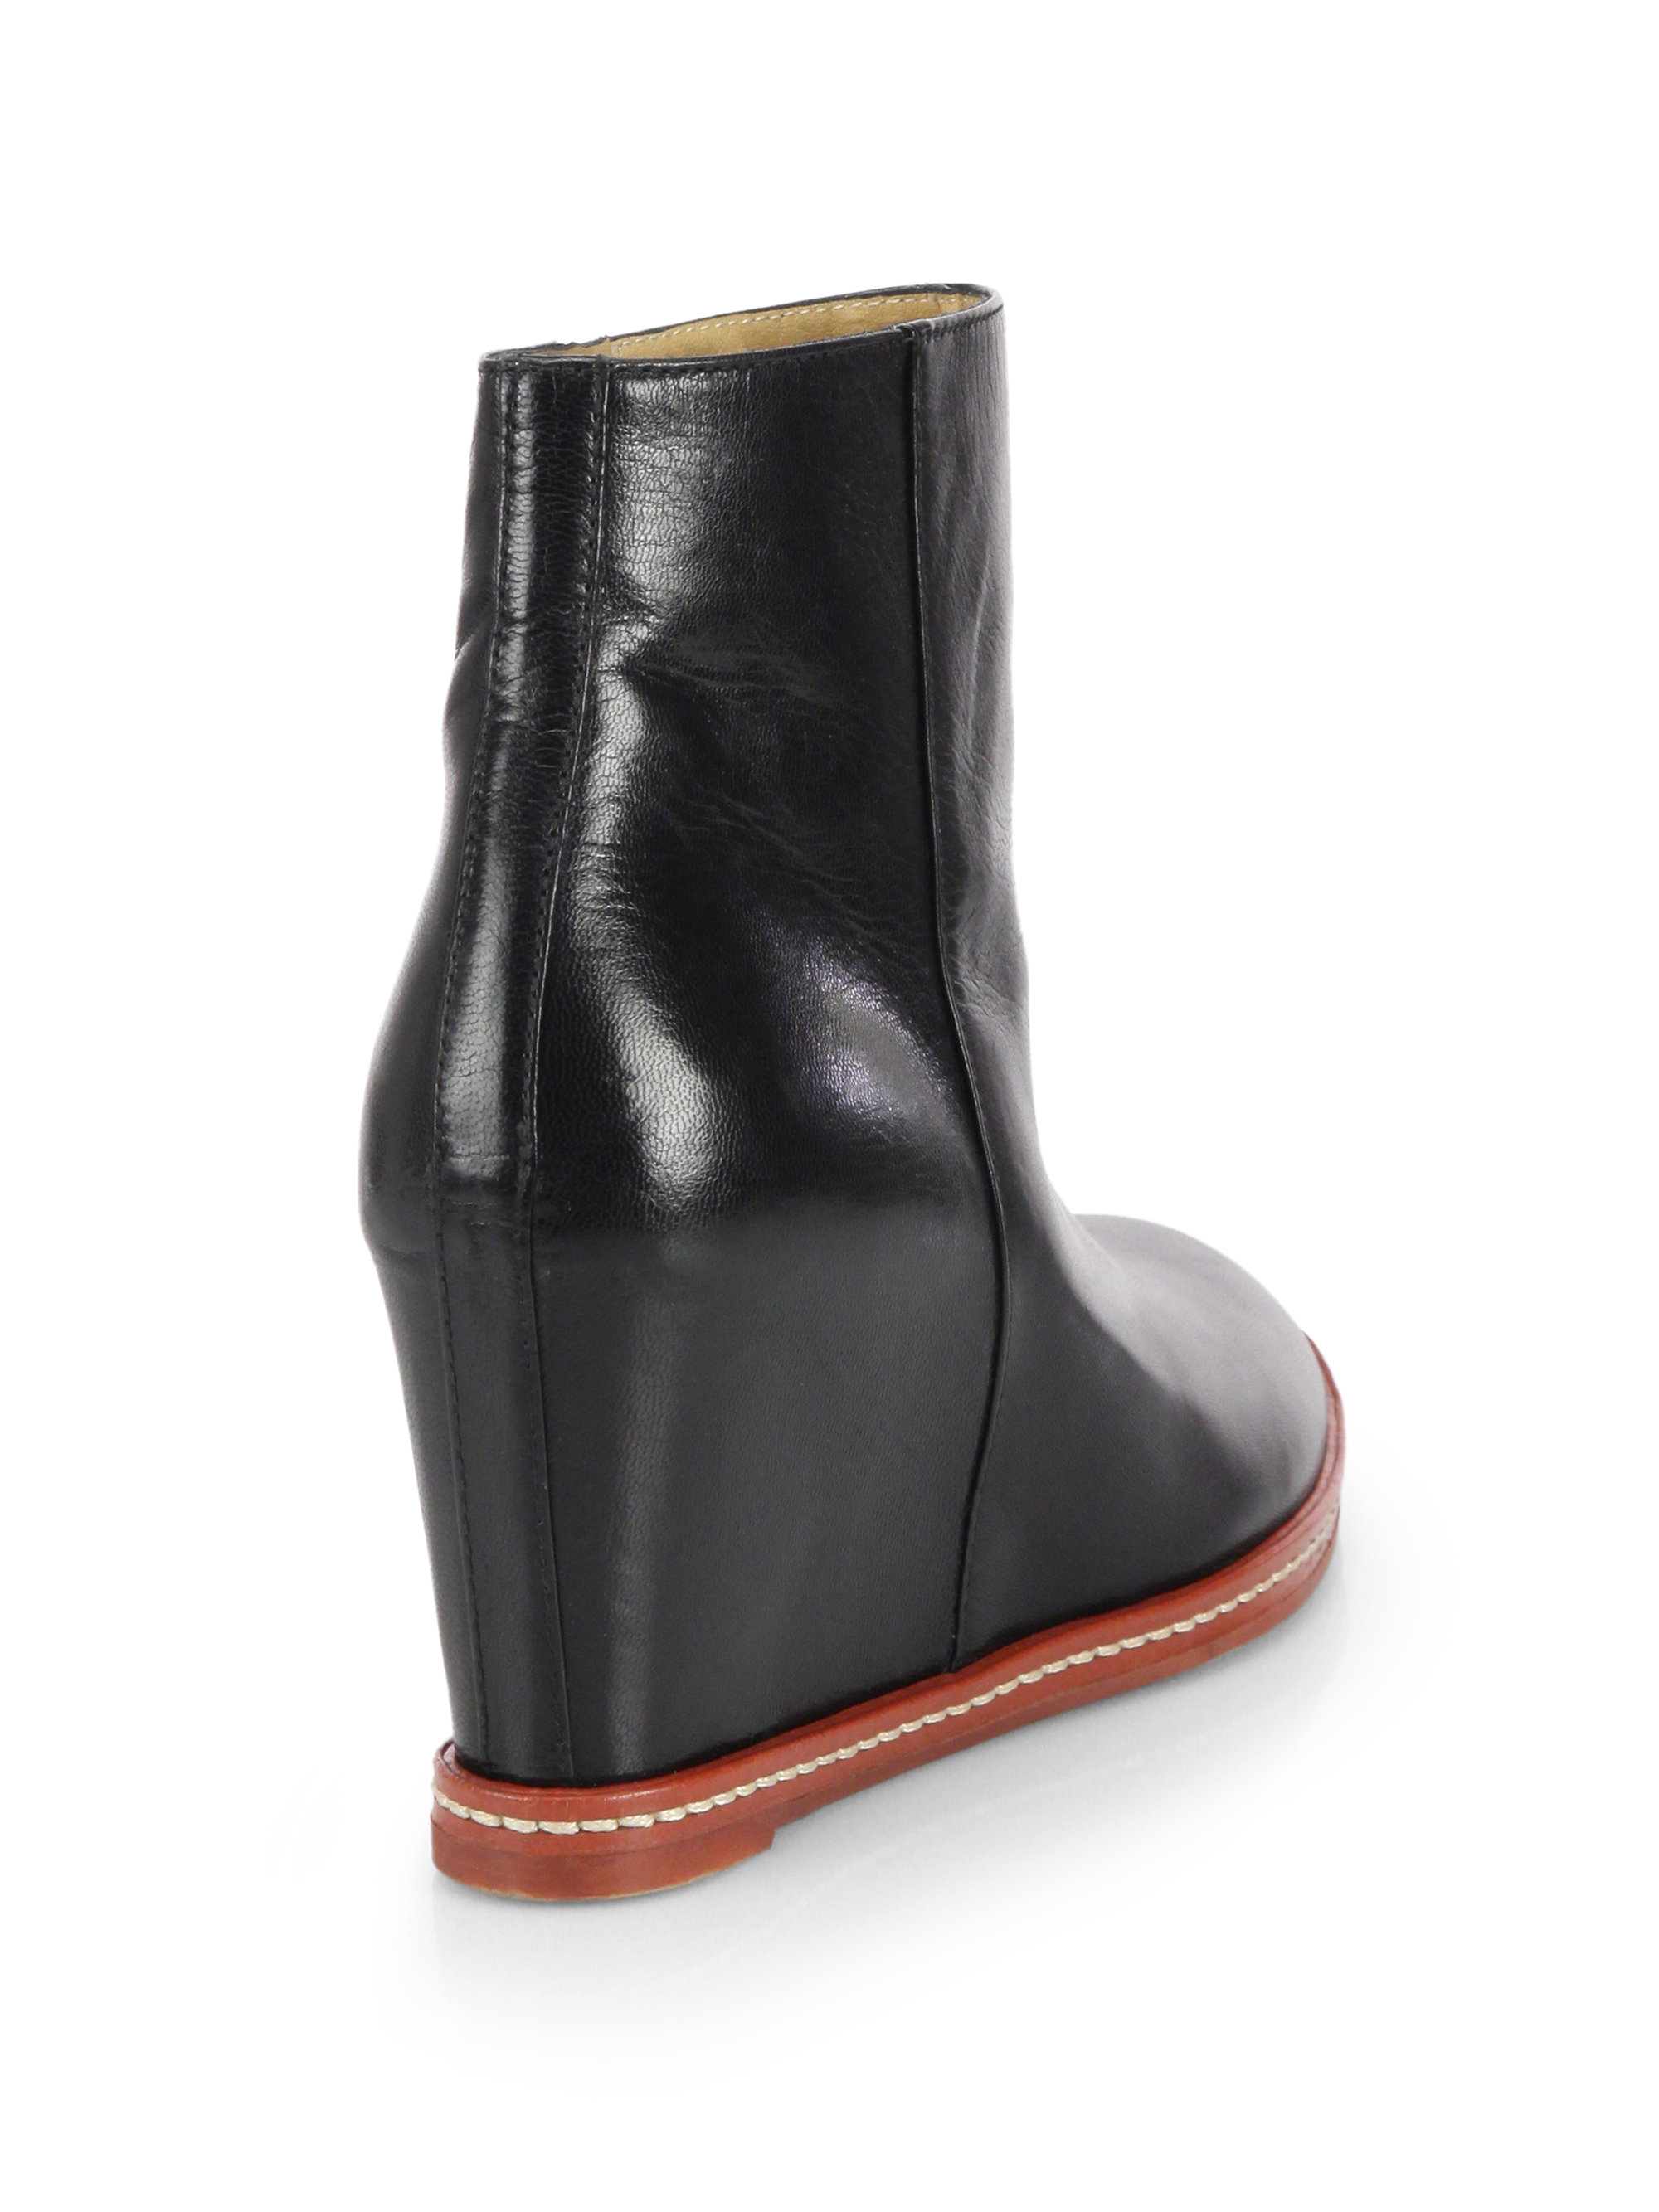 Mm6 By Maison Martin Margiela Leather Hidden Wedge Ankle Boots in Black